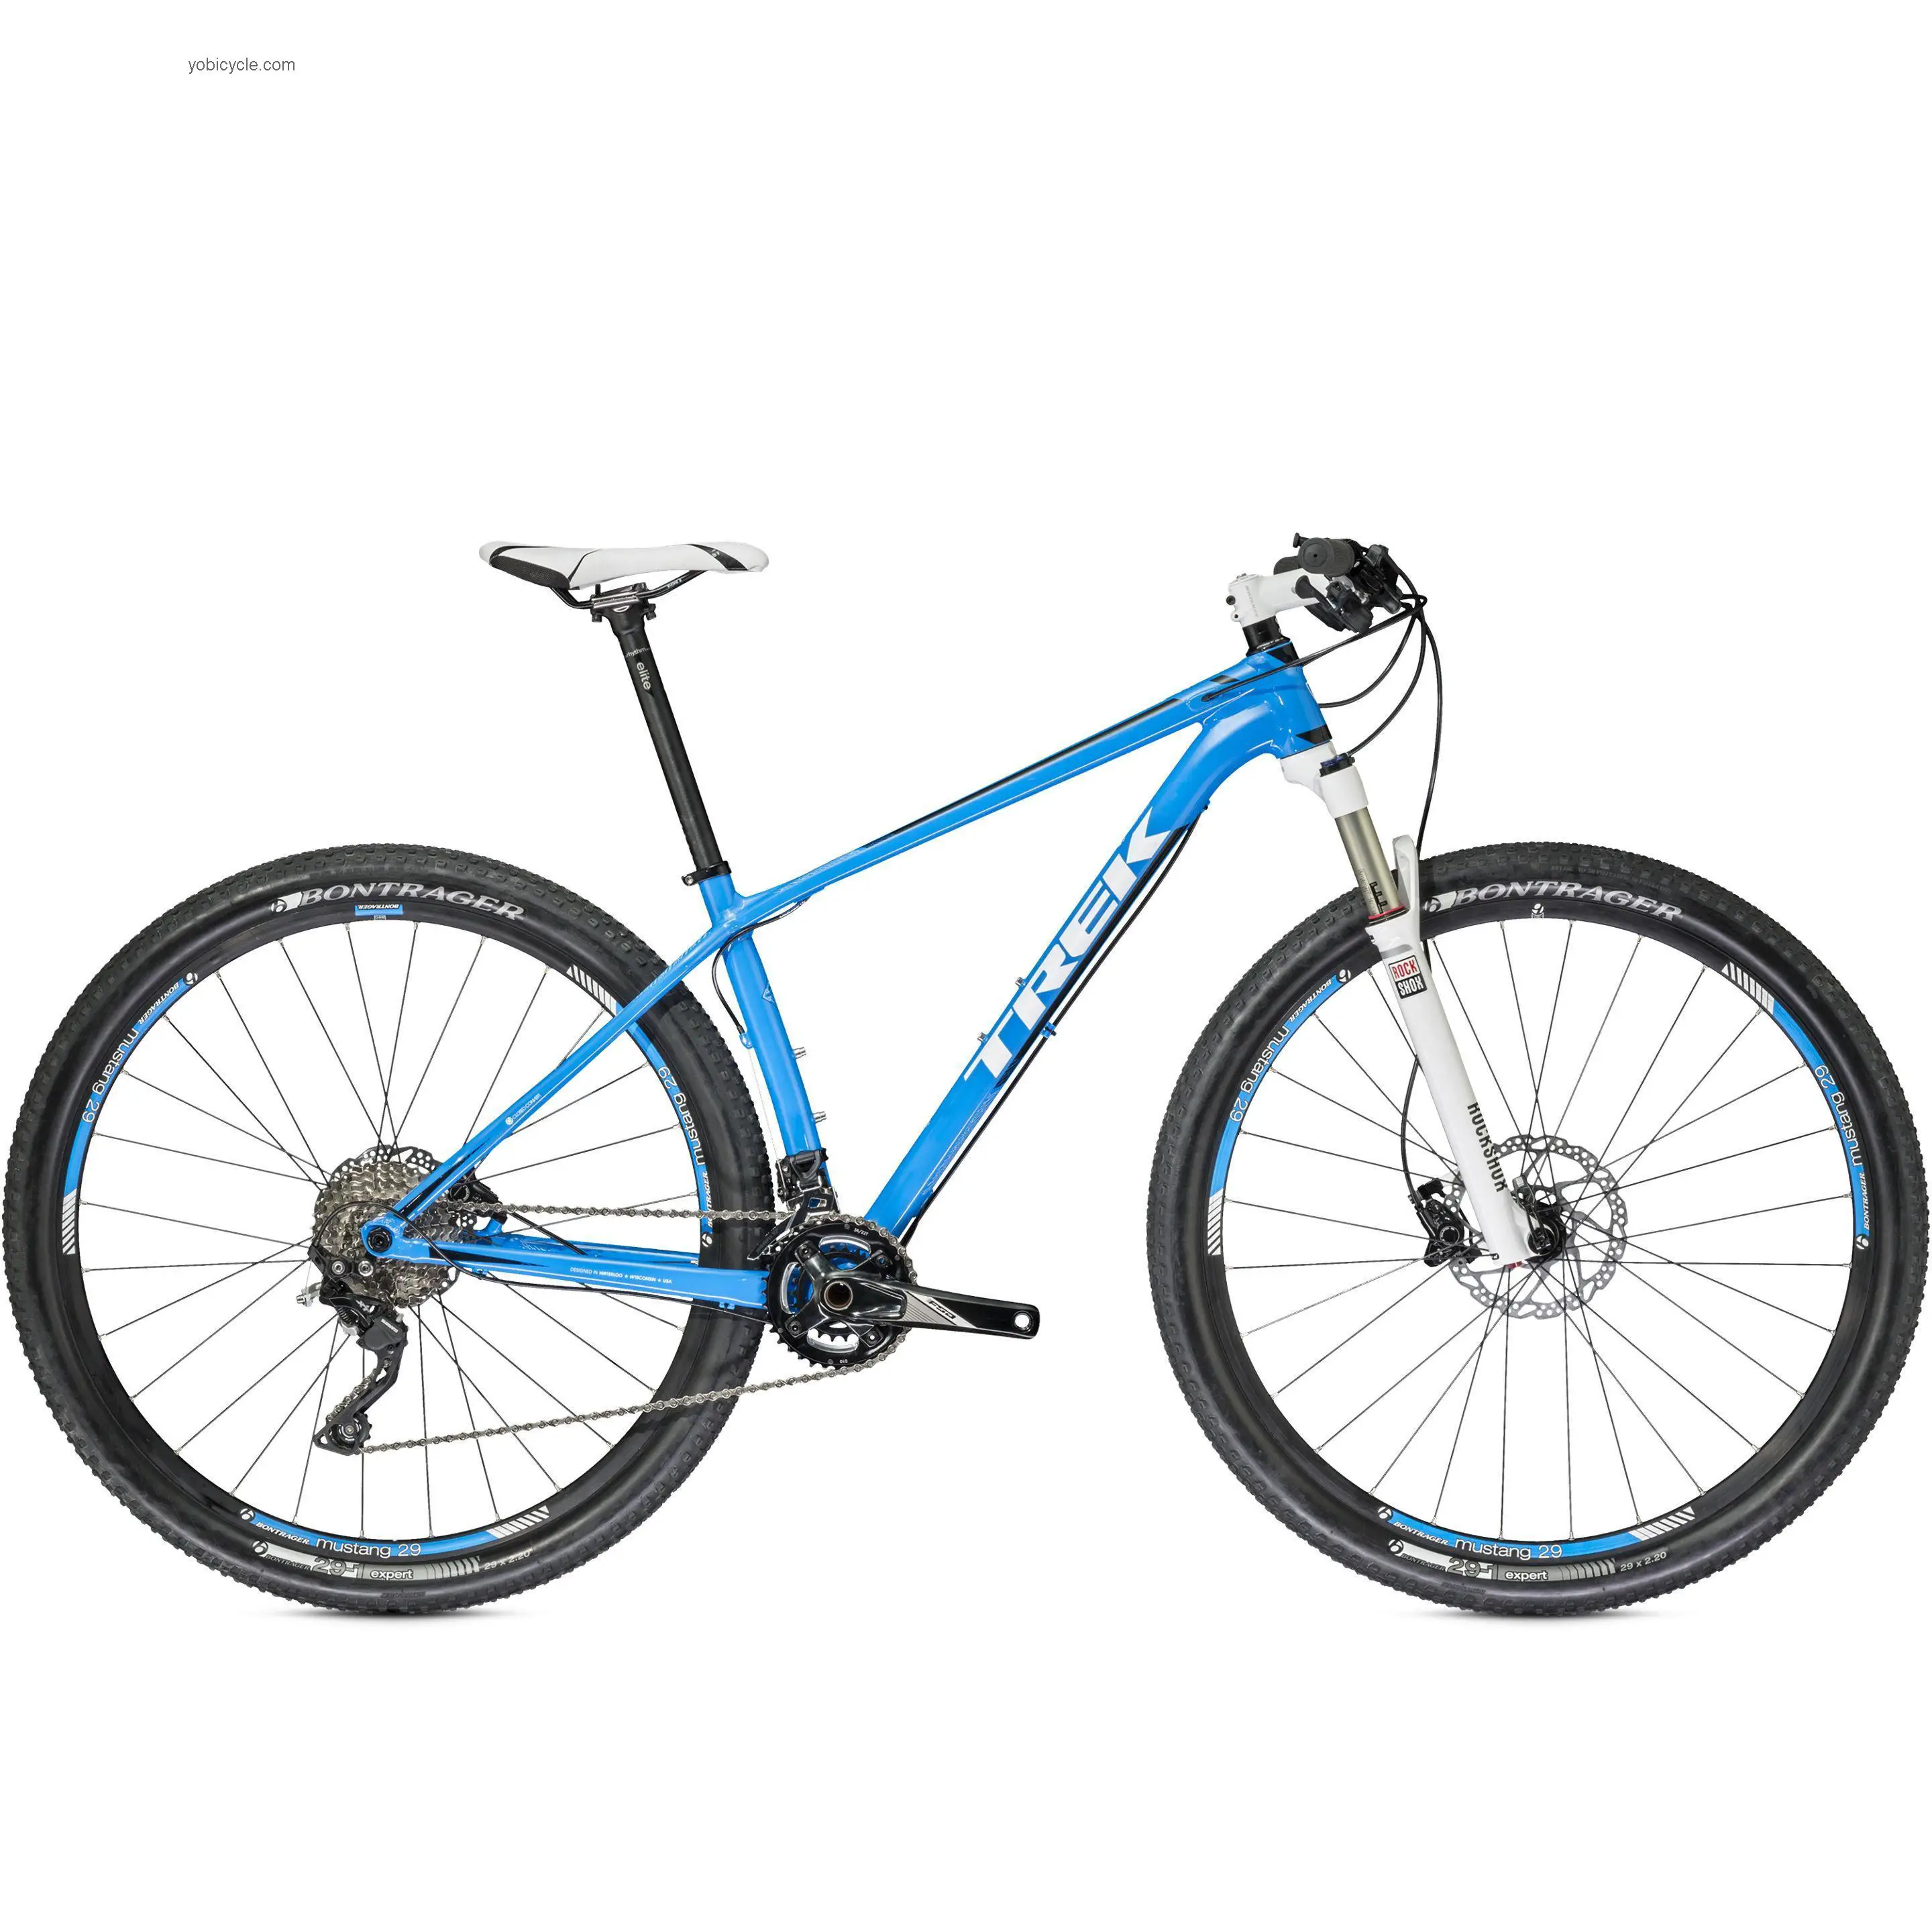 Trek Superfly 7 2014 comparison online with competitors